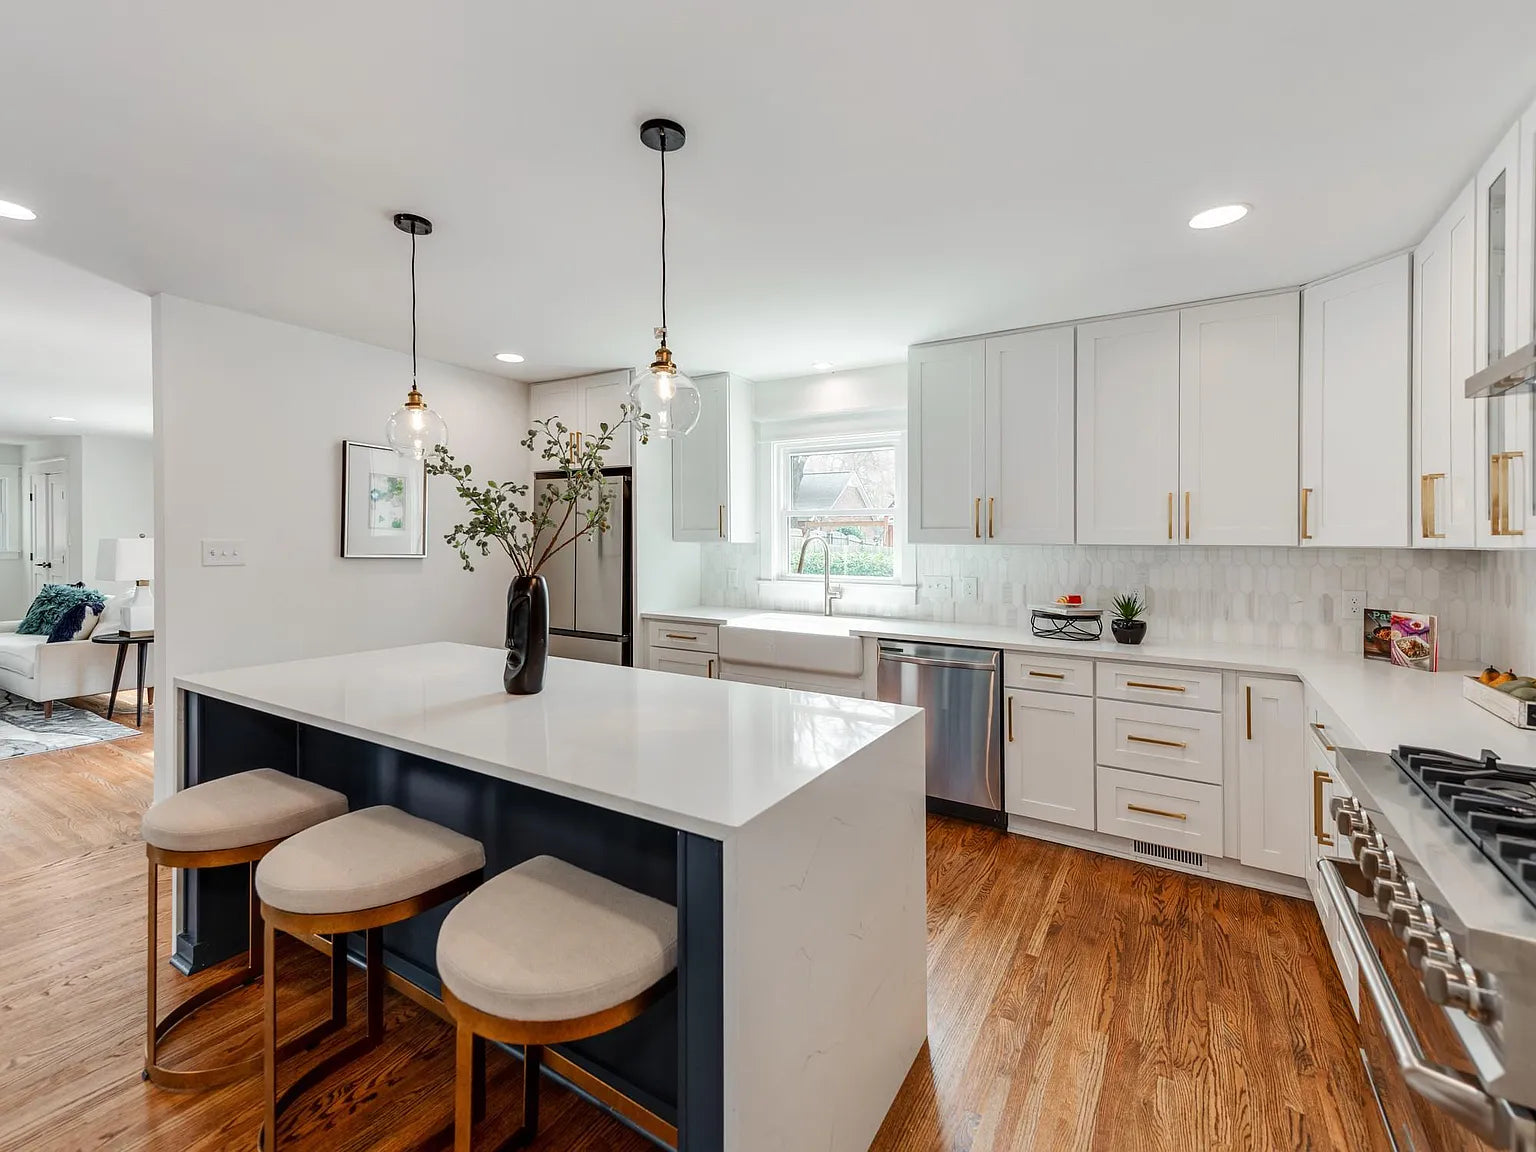 Transform Your Kitchen with Modern Shaker Cabinets: Tips for a Stylish Remodel